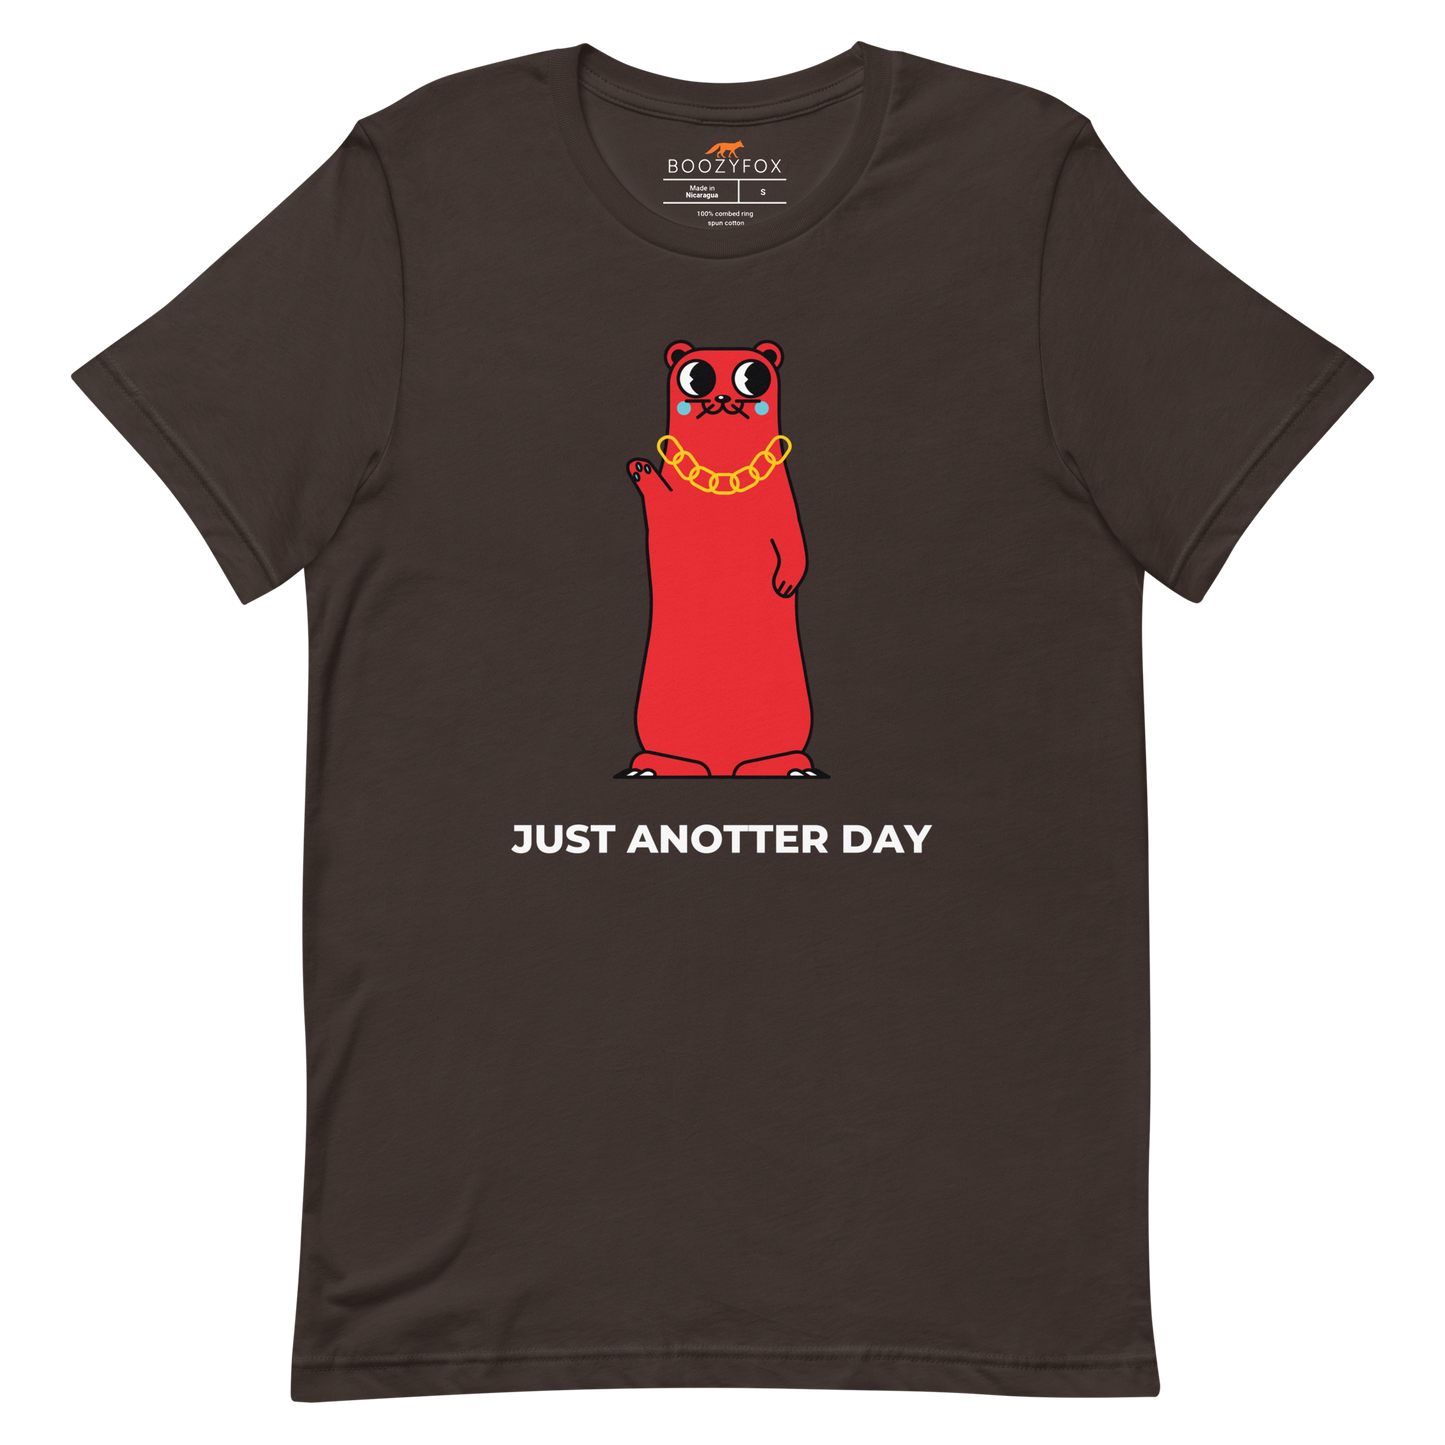 Brown Premium Otter T-Shirt featuring a Just Anotter Day graphic on the chest - Funny Graphic Otter Tees - Boozy Fox